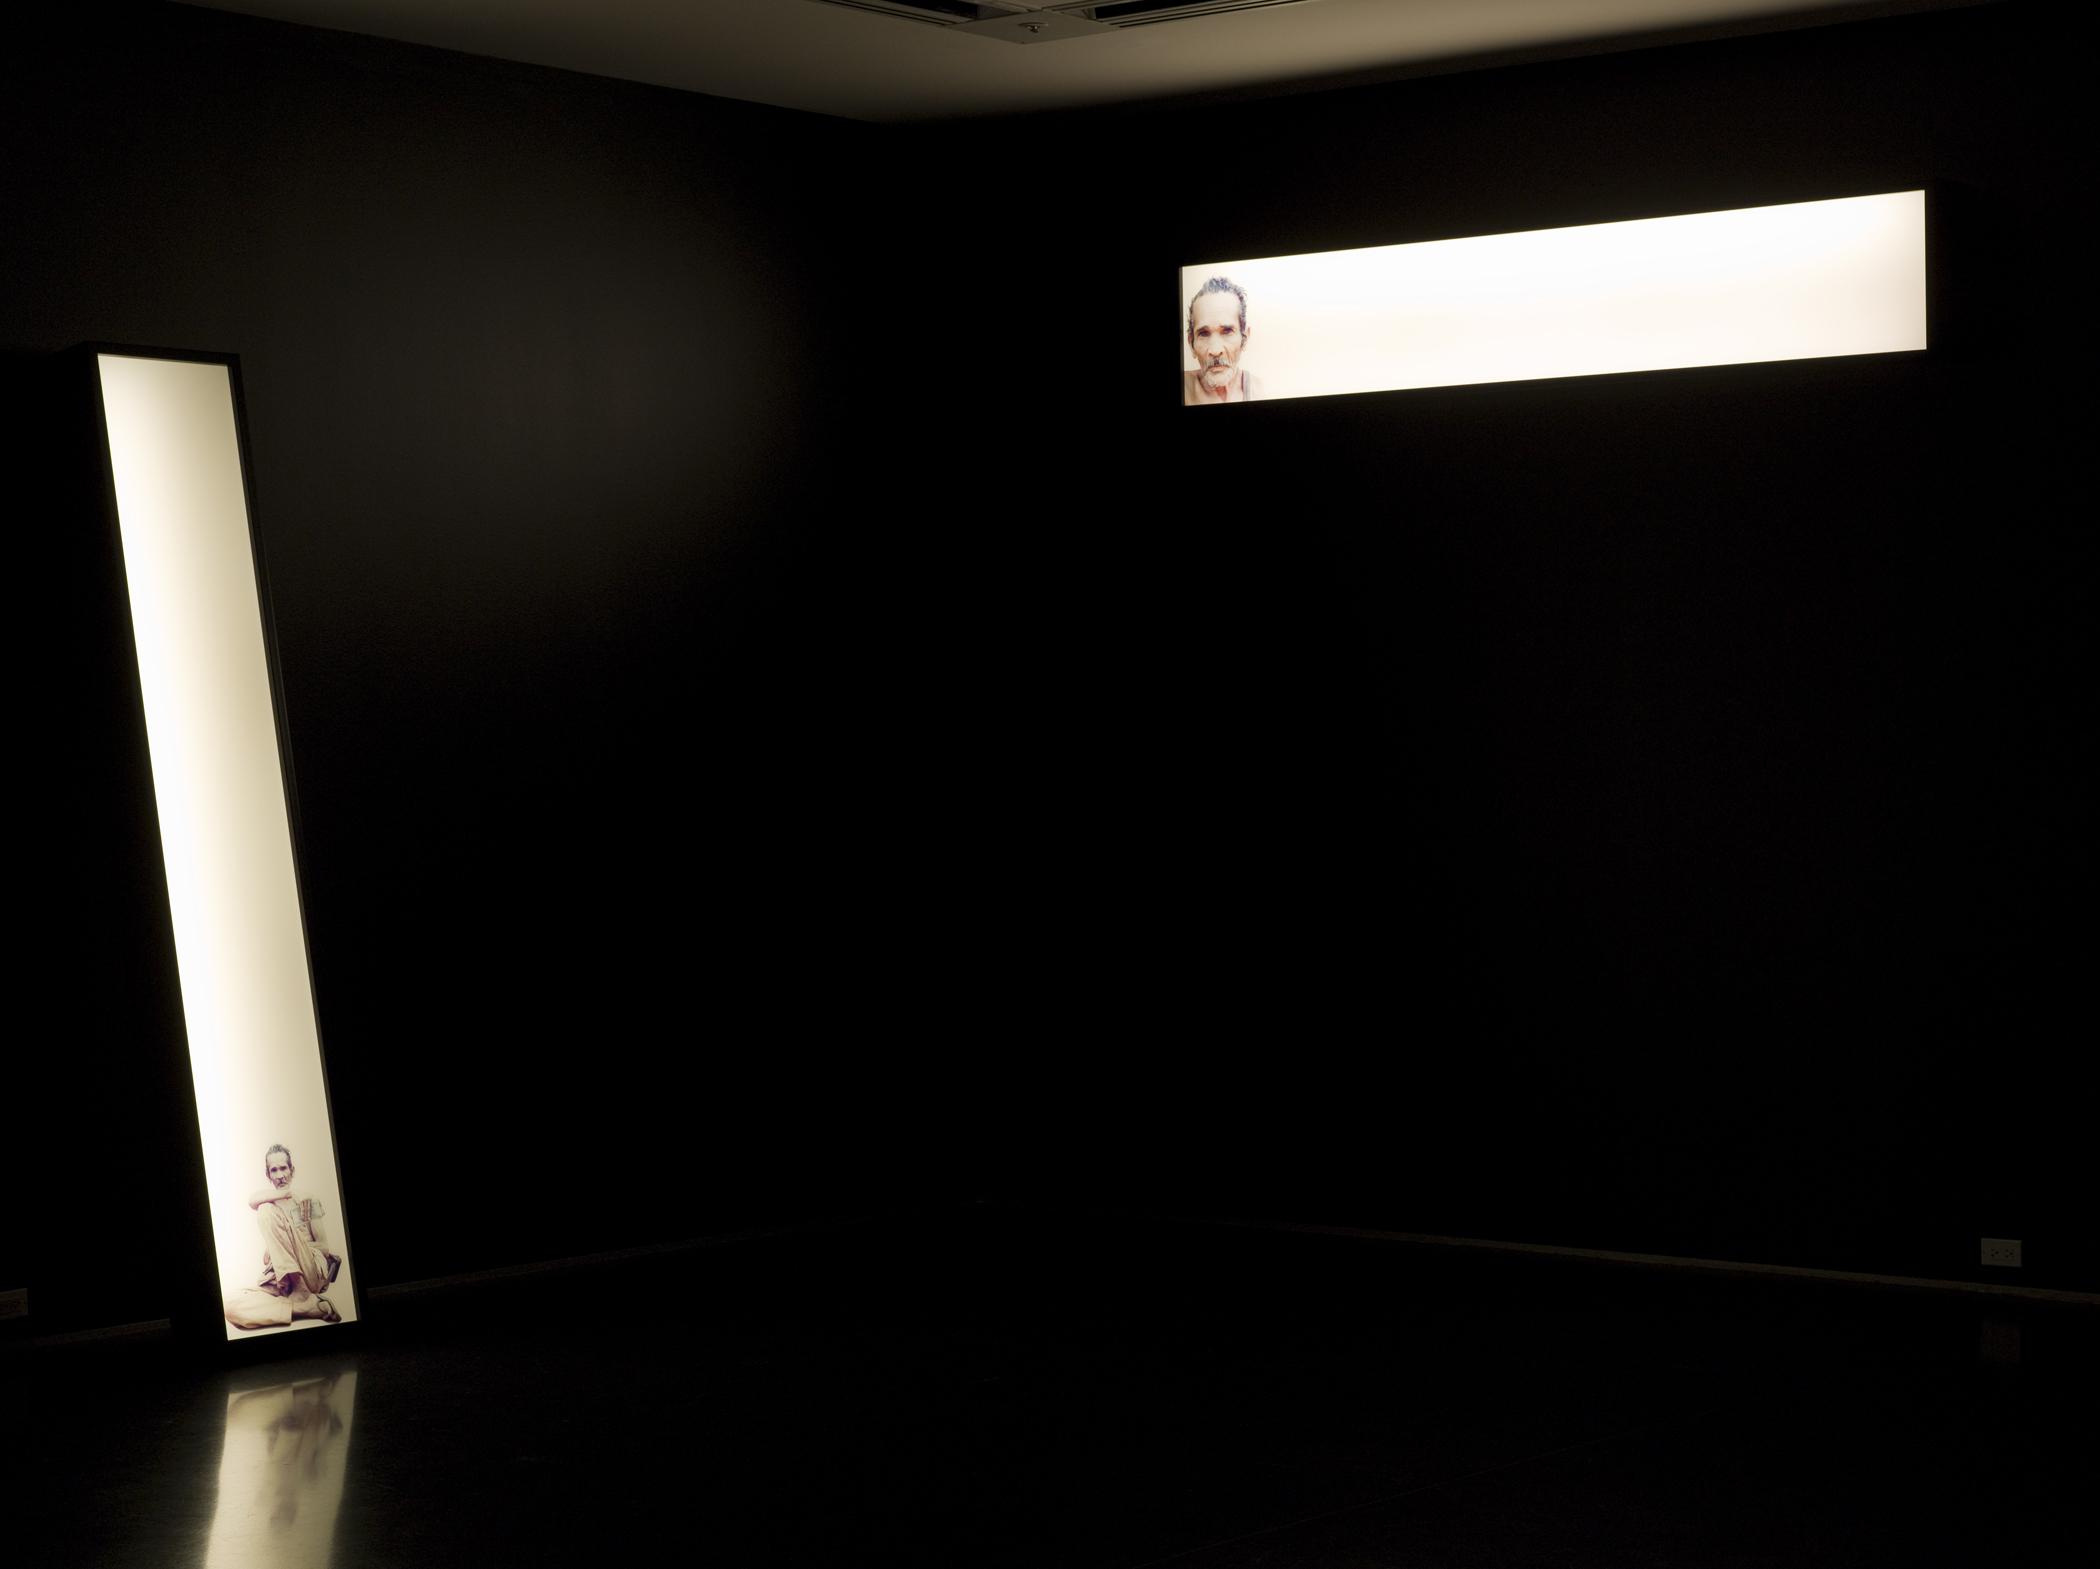 Two narrow white glowing rectangles depicting a man illuminate a pitch-black room. The horizontal box on the right hangs high on the wall; the other leans against the wall to the left.